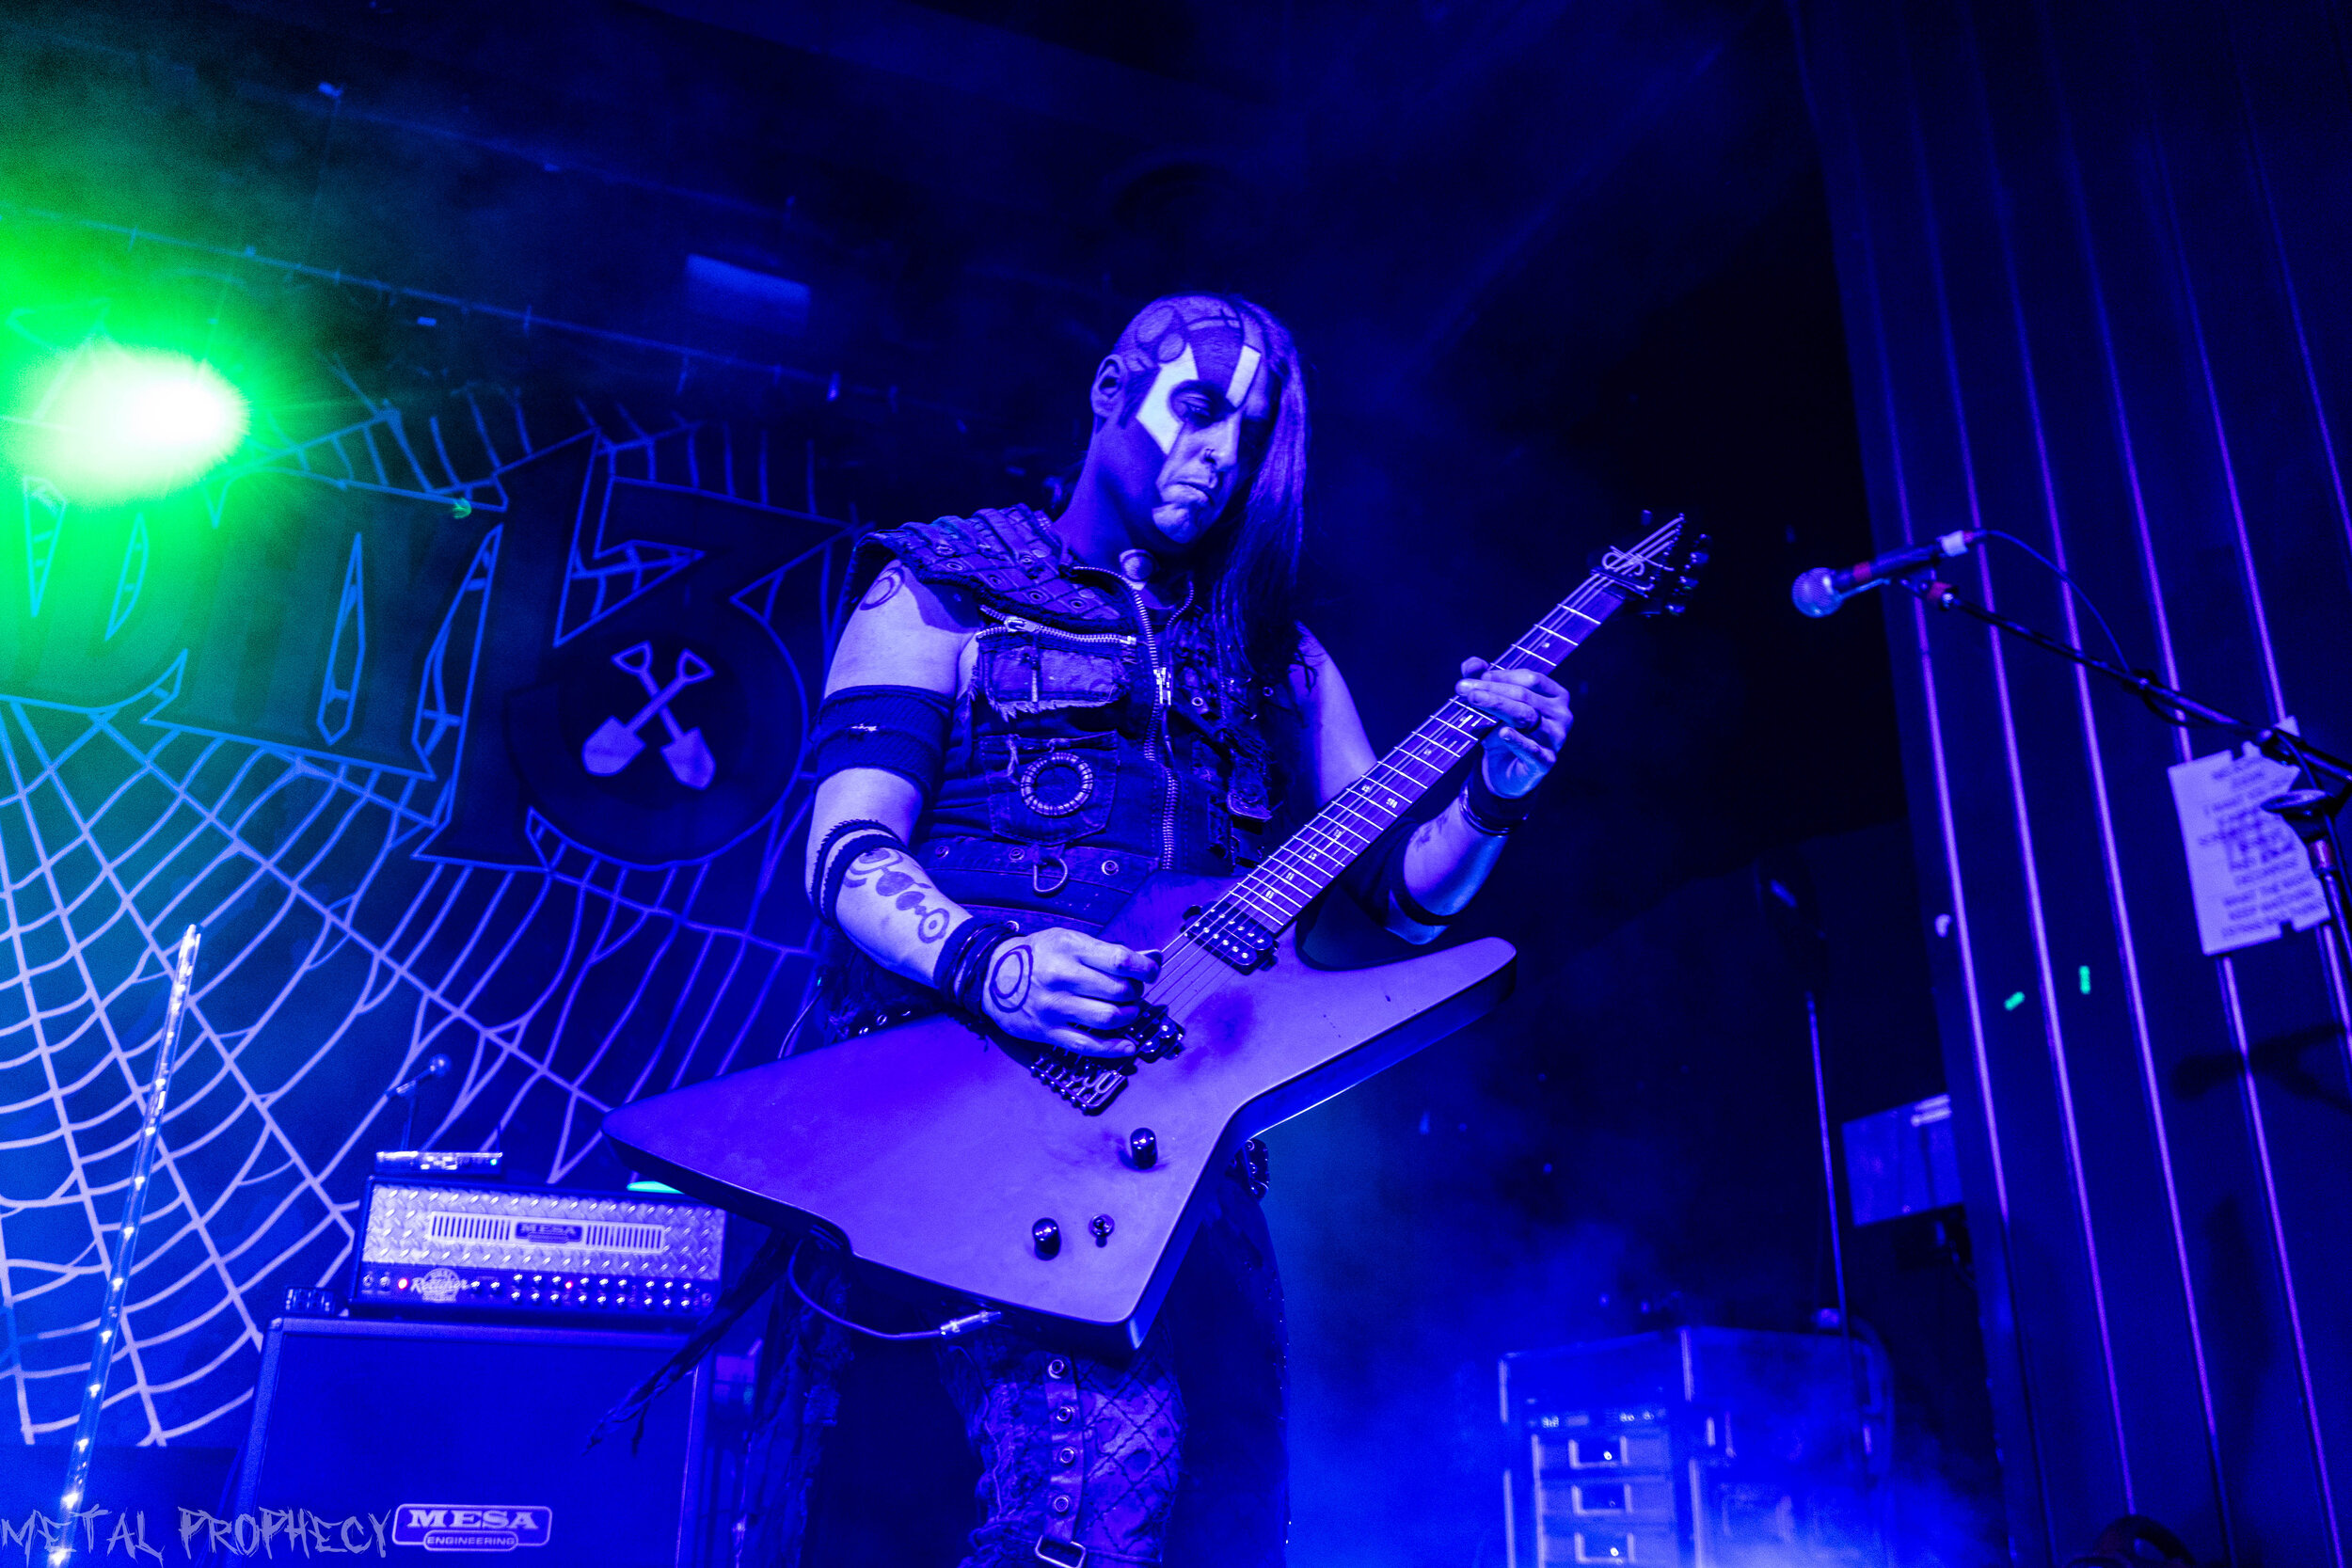 Wednesday 13 at The Masquerade (Hell)